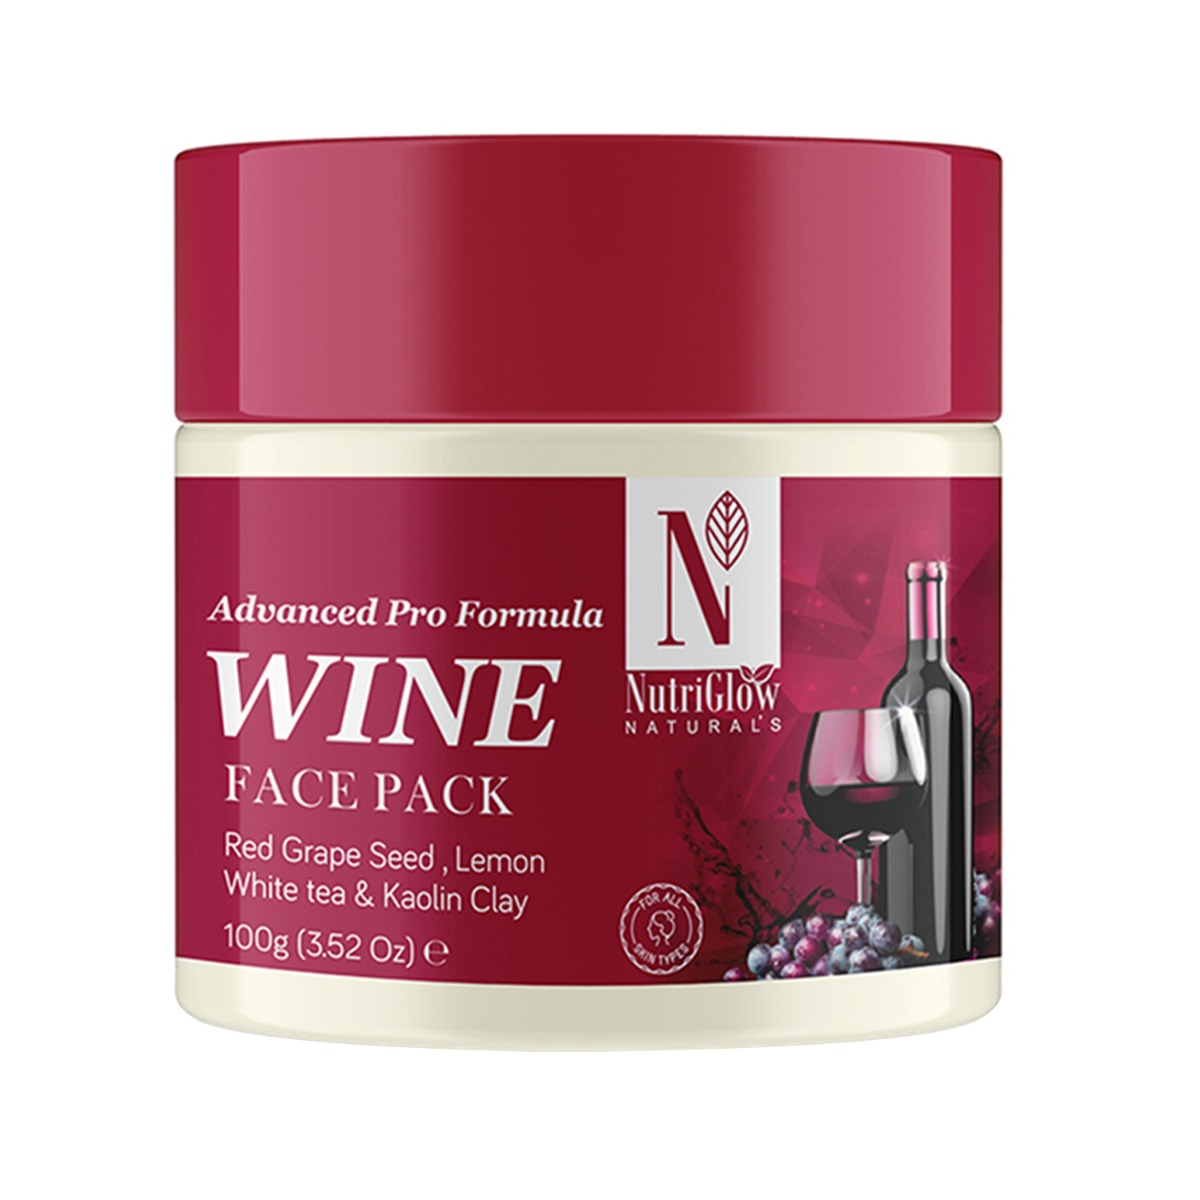 NutriGlow Natural's Advanced Pro Formula Wine Face Pack, 100gm